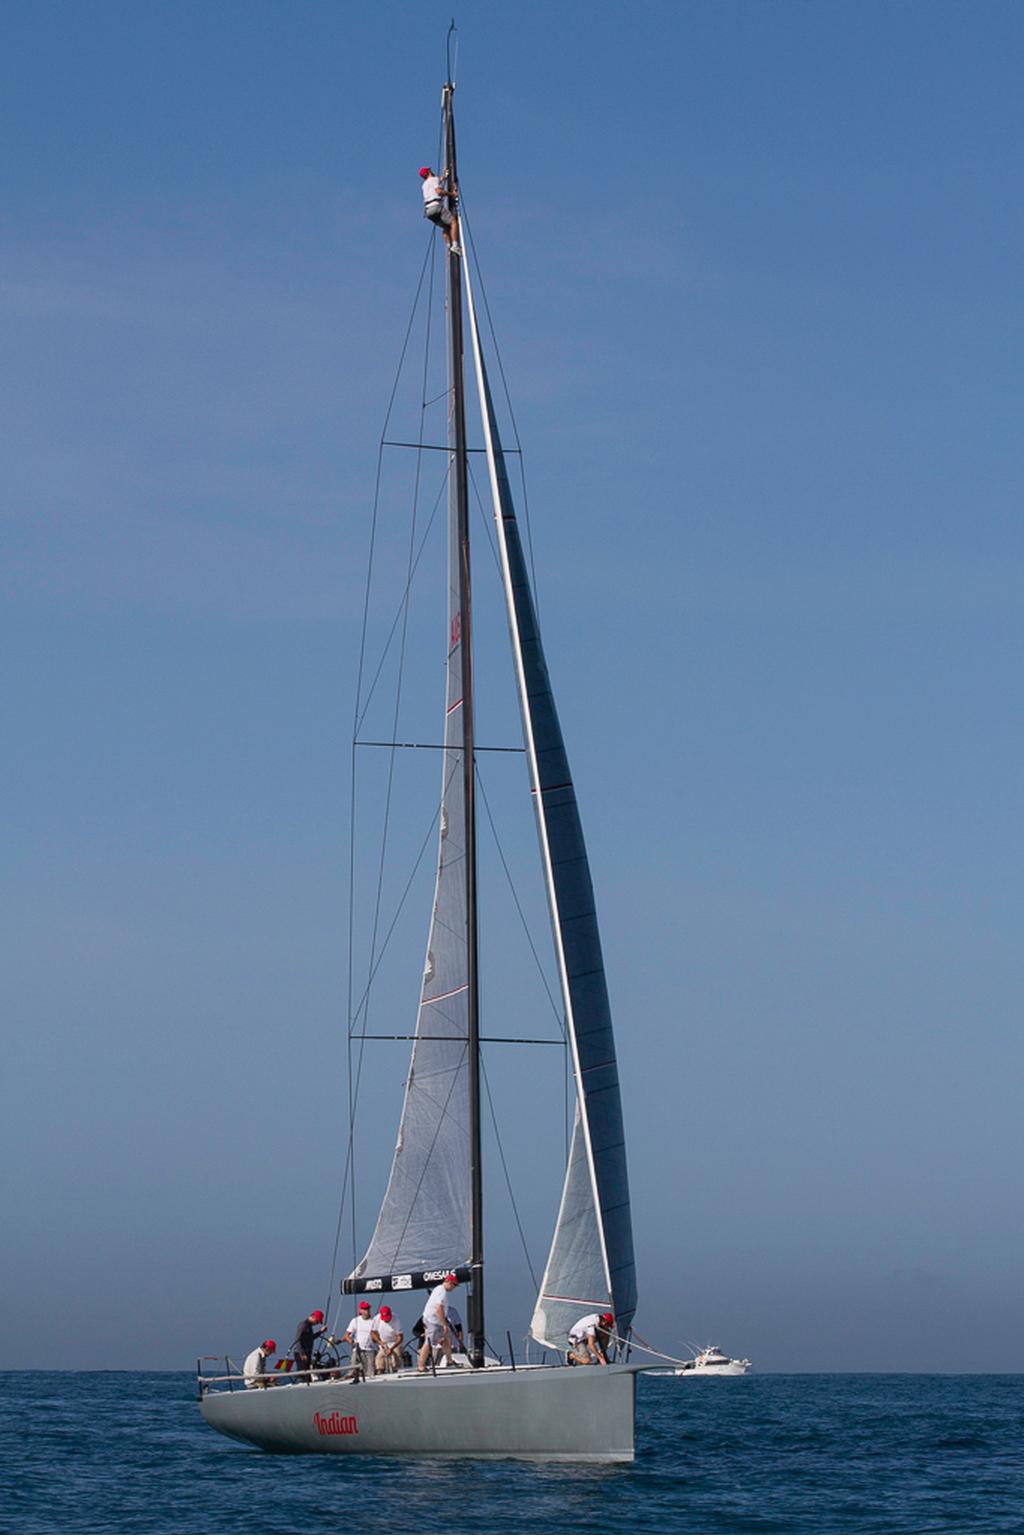 Craig Carter's Indian had a man up the mast before the start - George Law Memorial Race © Bernie Kaaks